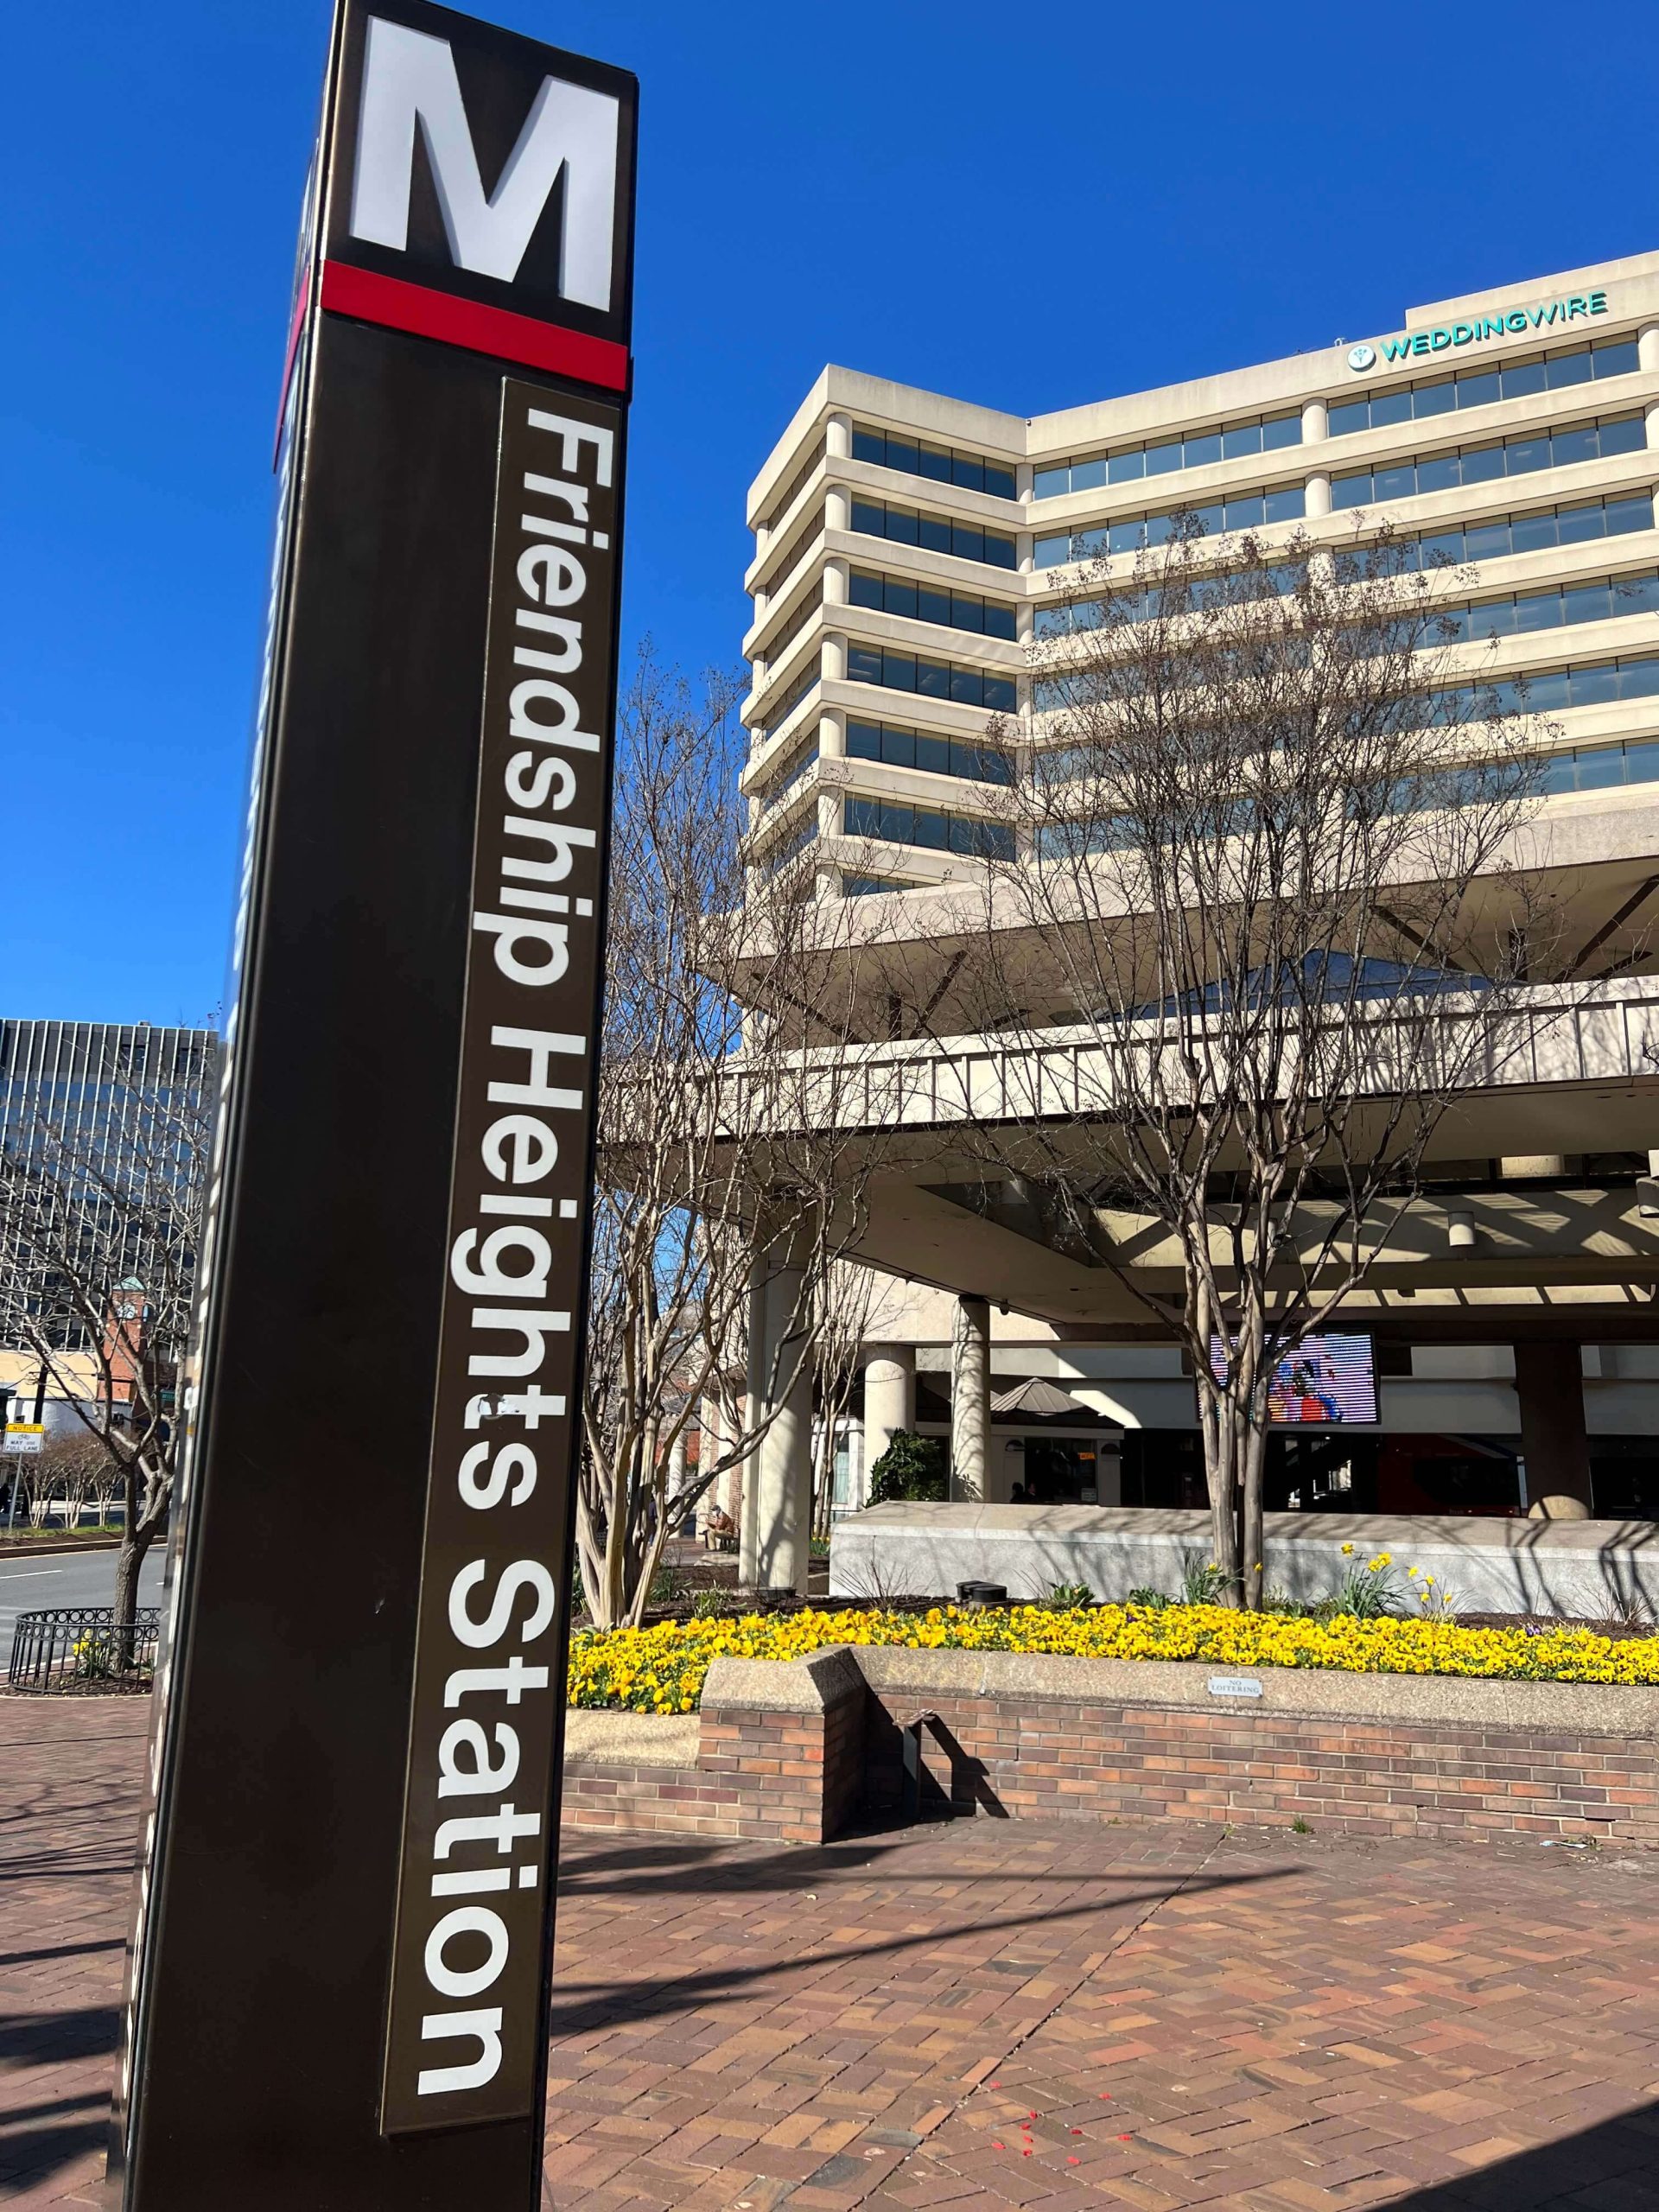 The Friendship Heights Metro Station sign, with Monarch Wellness office in the background.